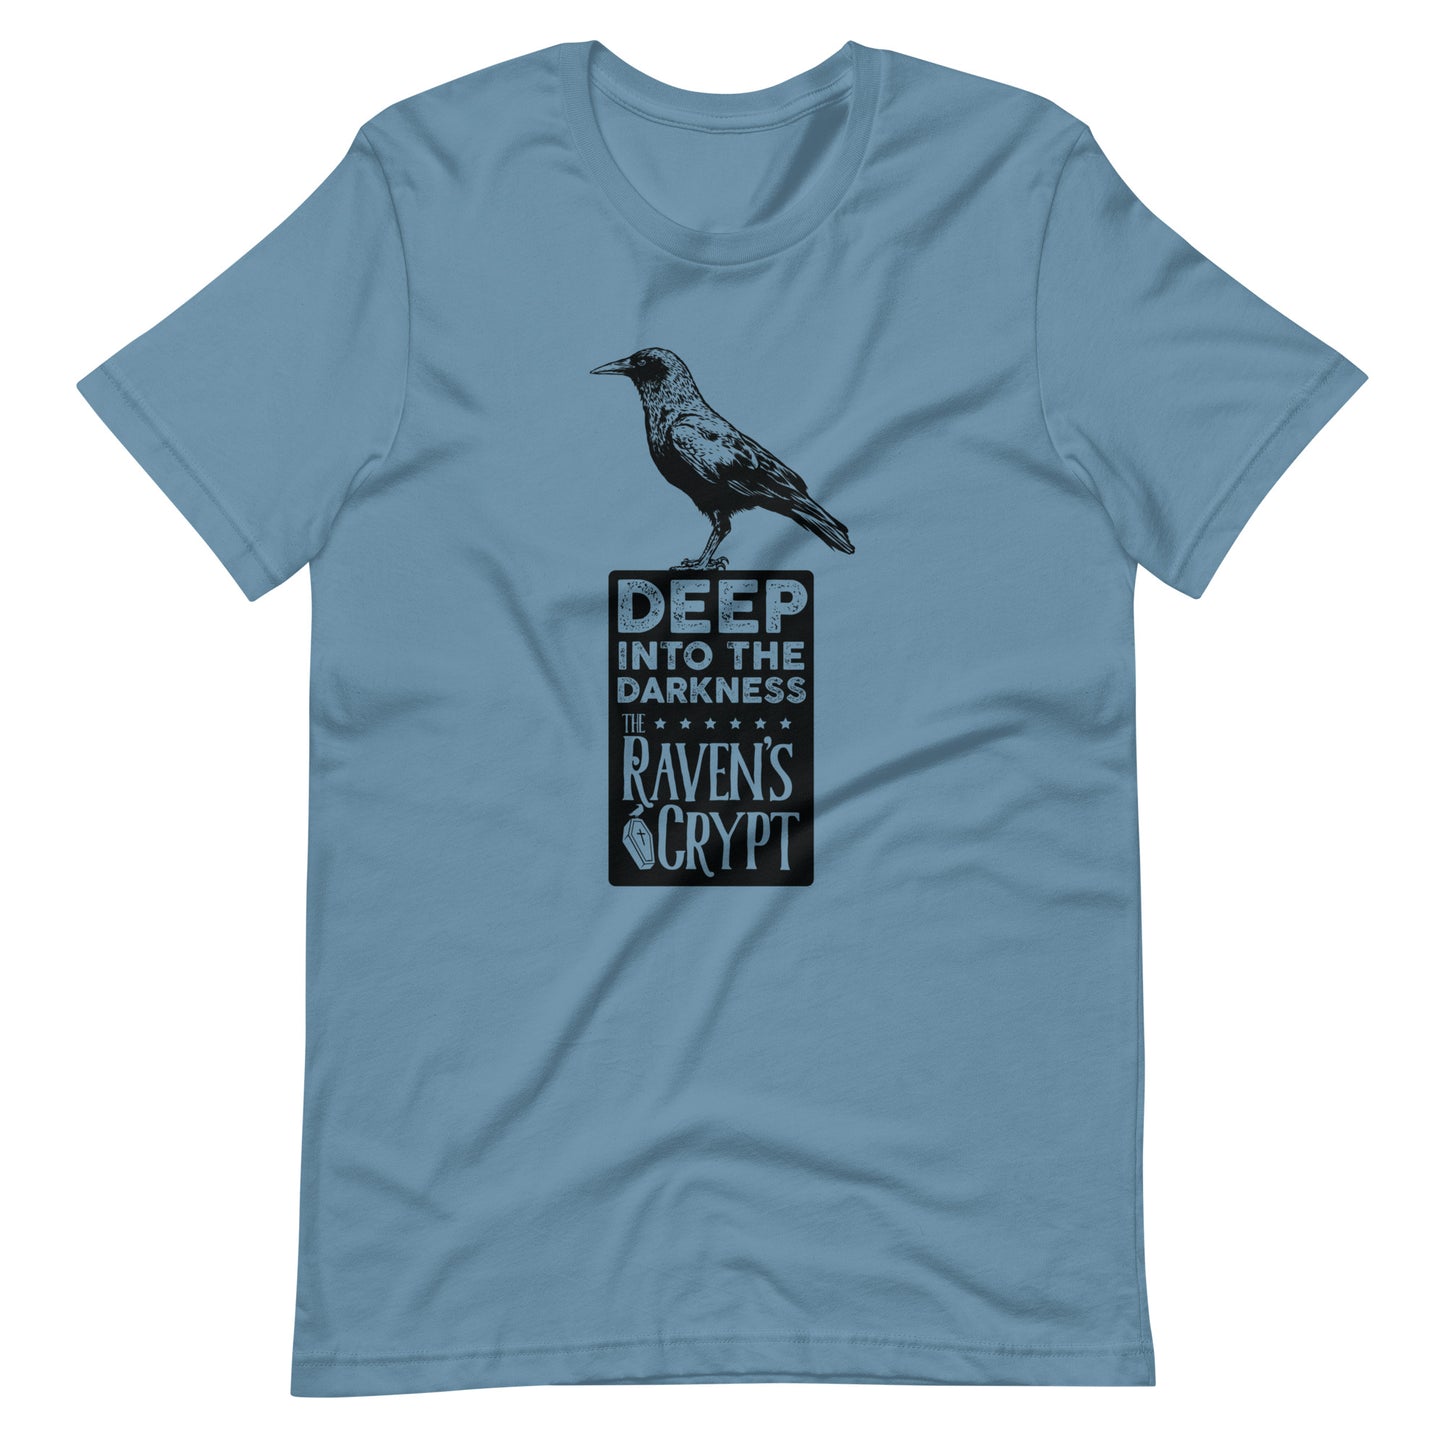 Deep Into the Darkness Crypt 2 - Men's t-shirt - Steel Blue Front